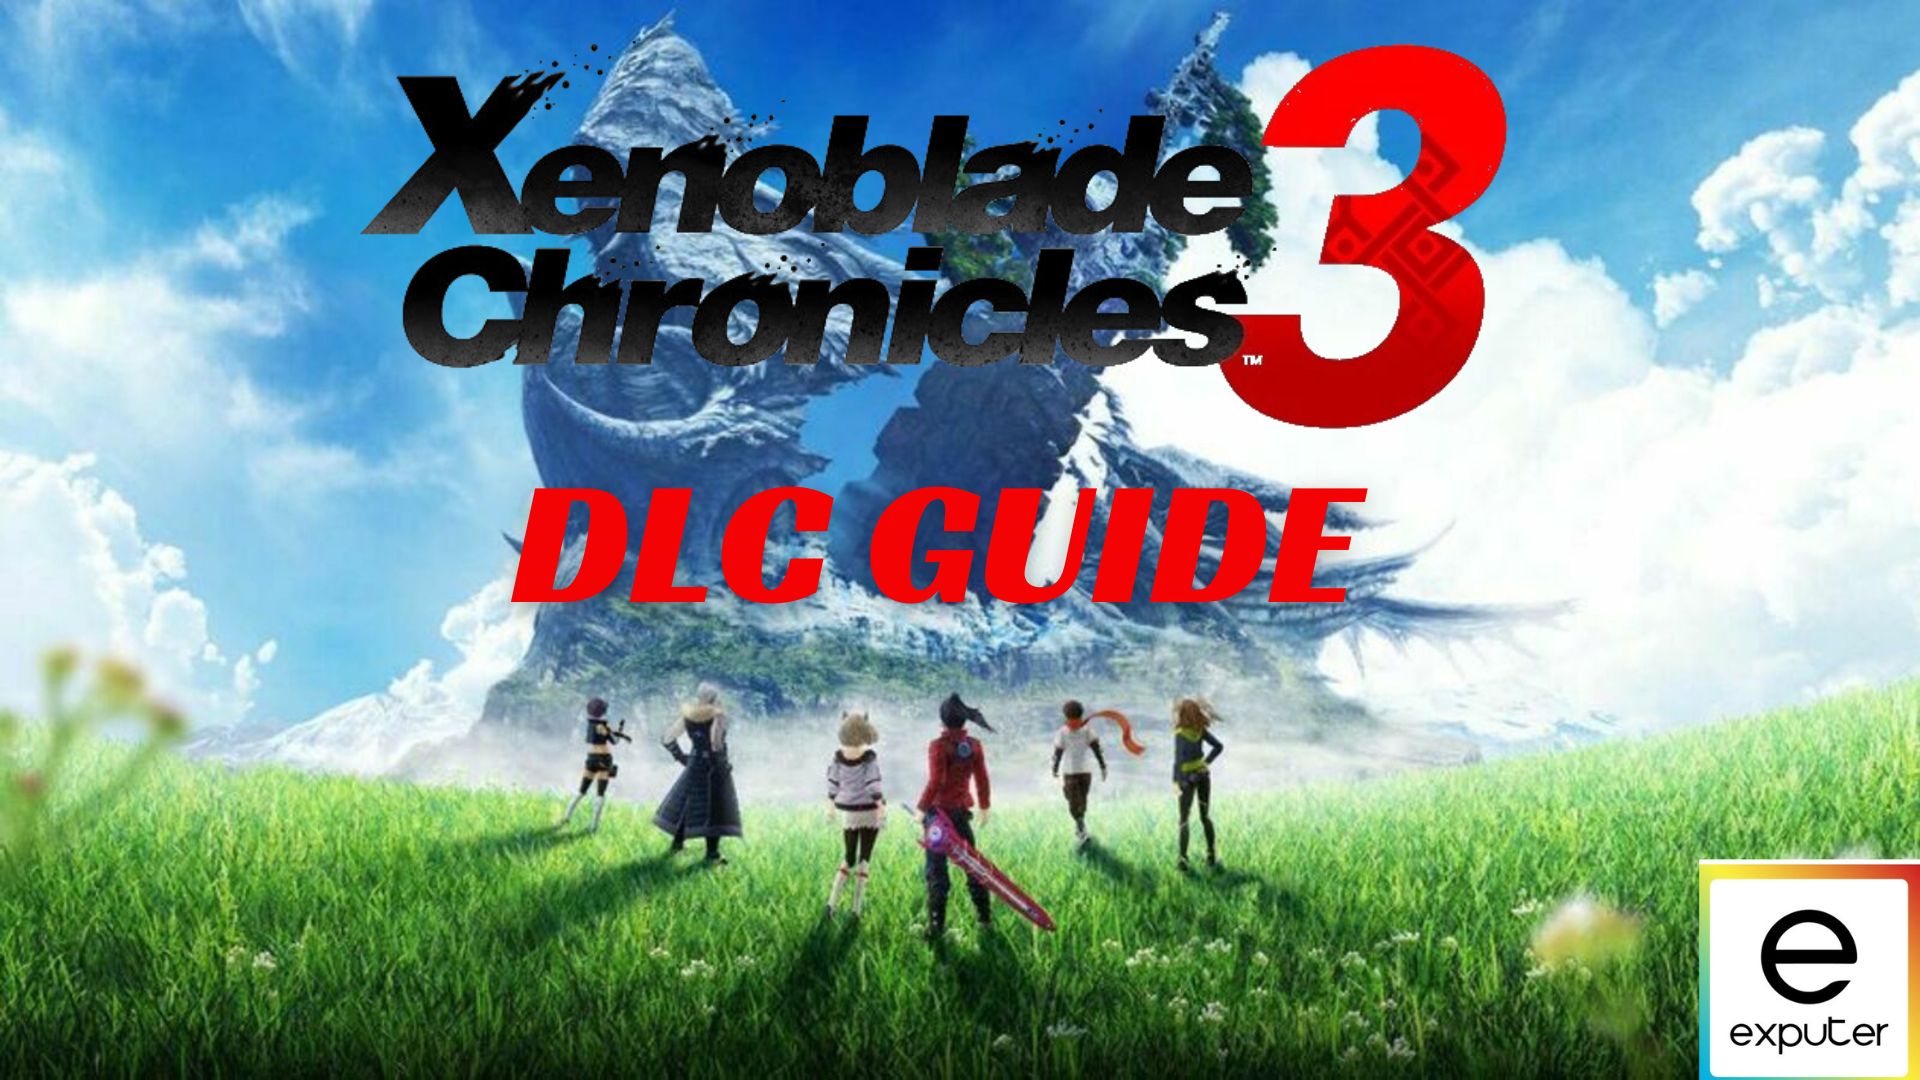 Xenoblade Chronicles 3 Expansion Pass: All DLC waves, roadmap, and release  dates revealed